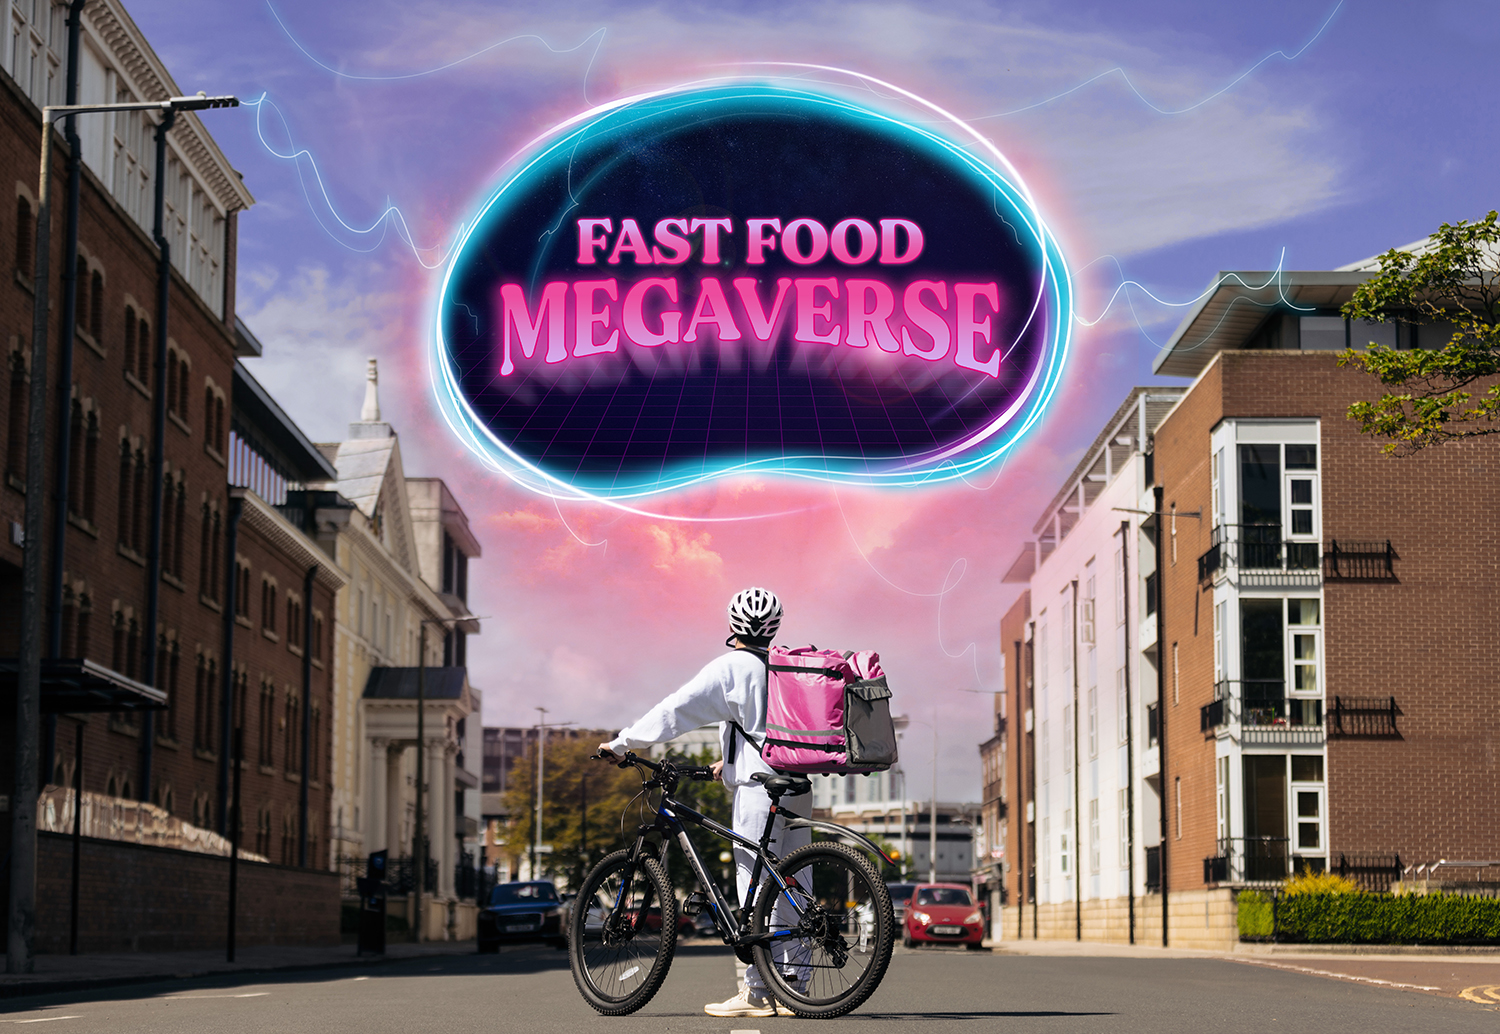 Fast Food Megaverse coming to Solihull!